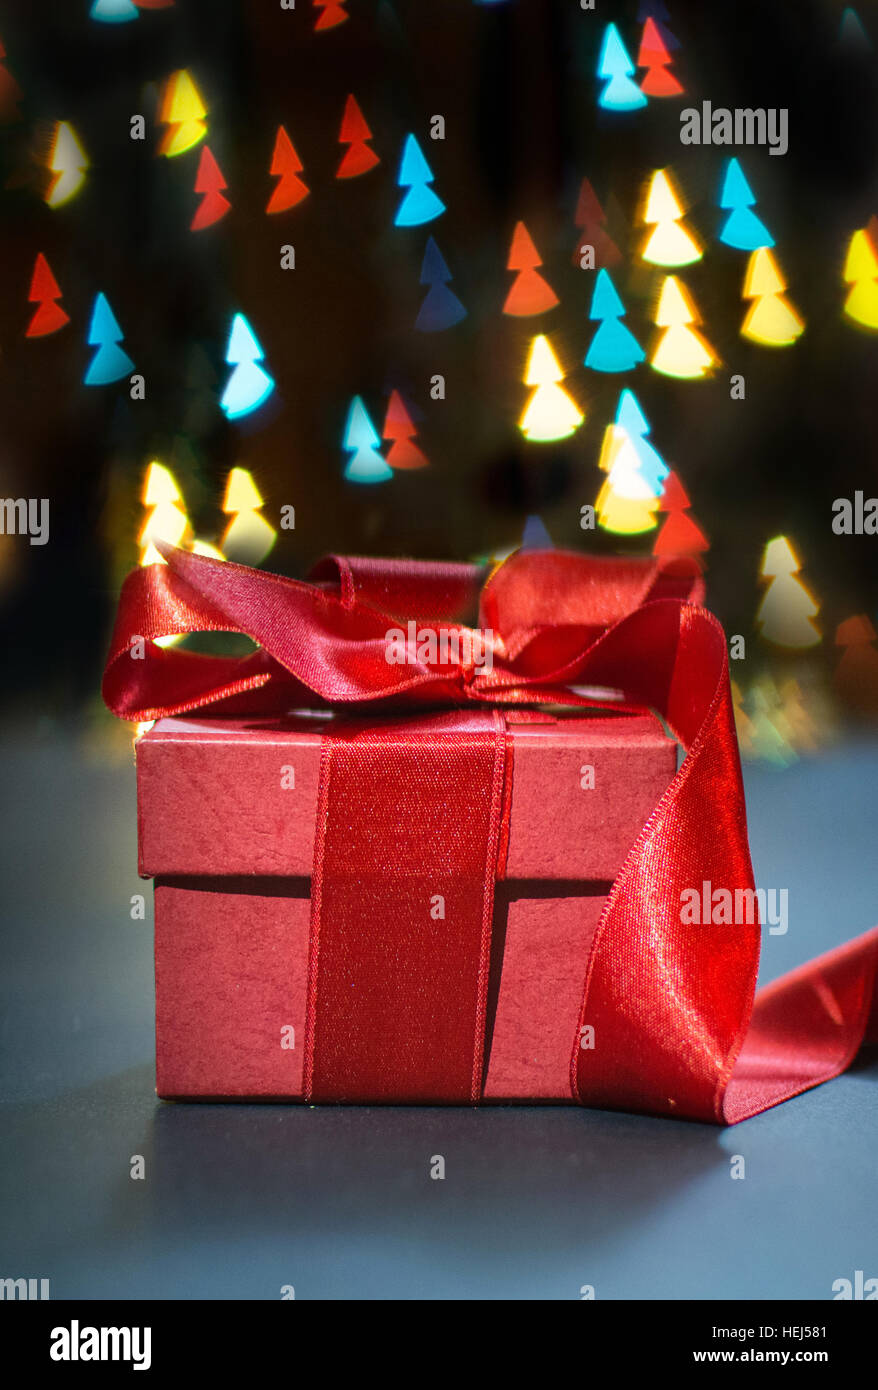 Red present box with Christmas tree shaped bokeh lights Stock Photo